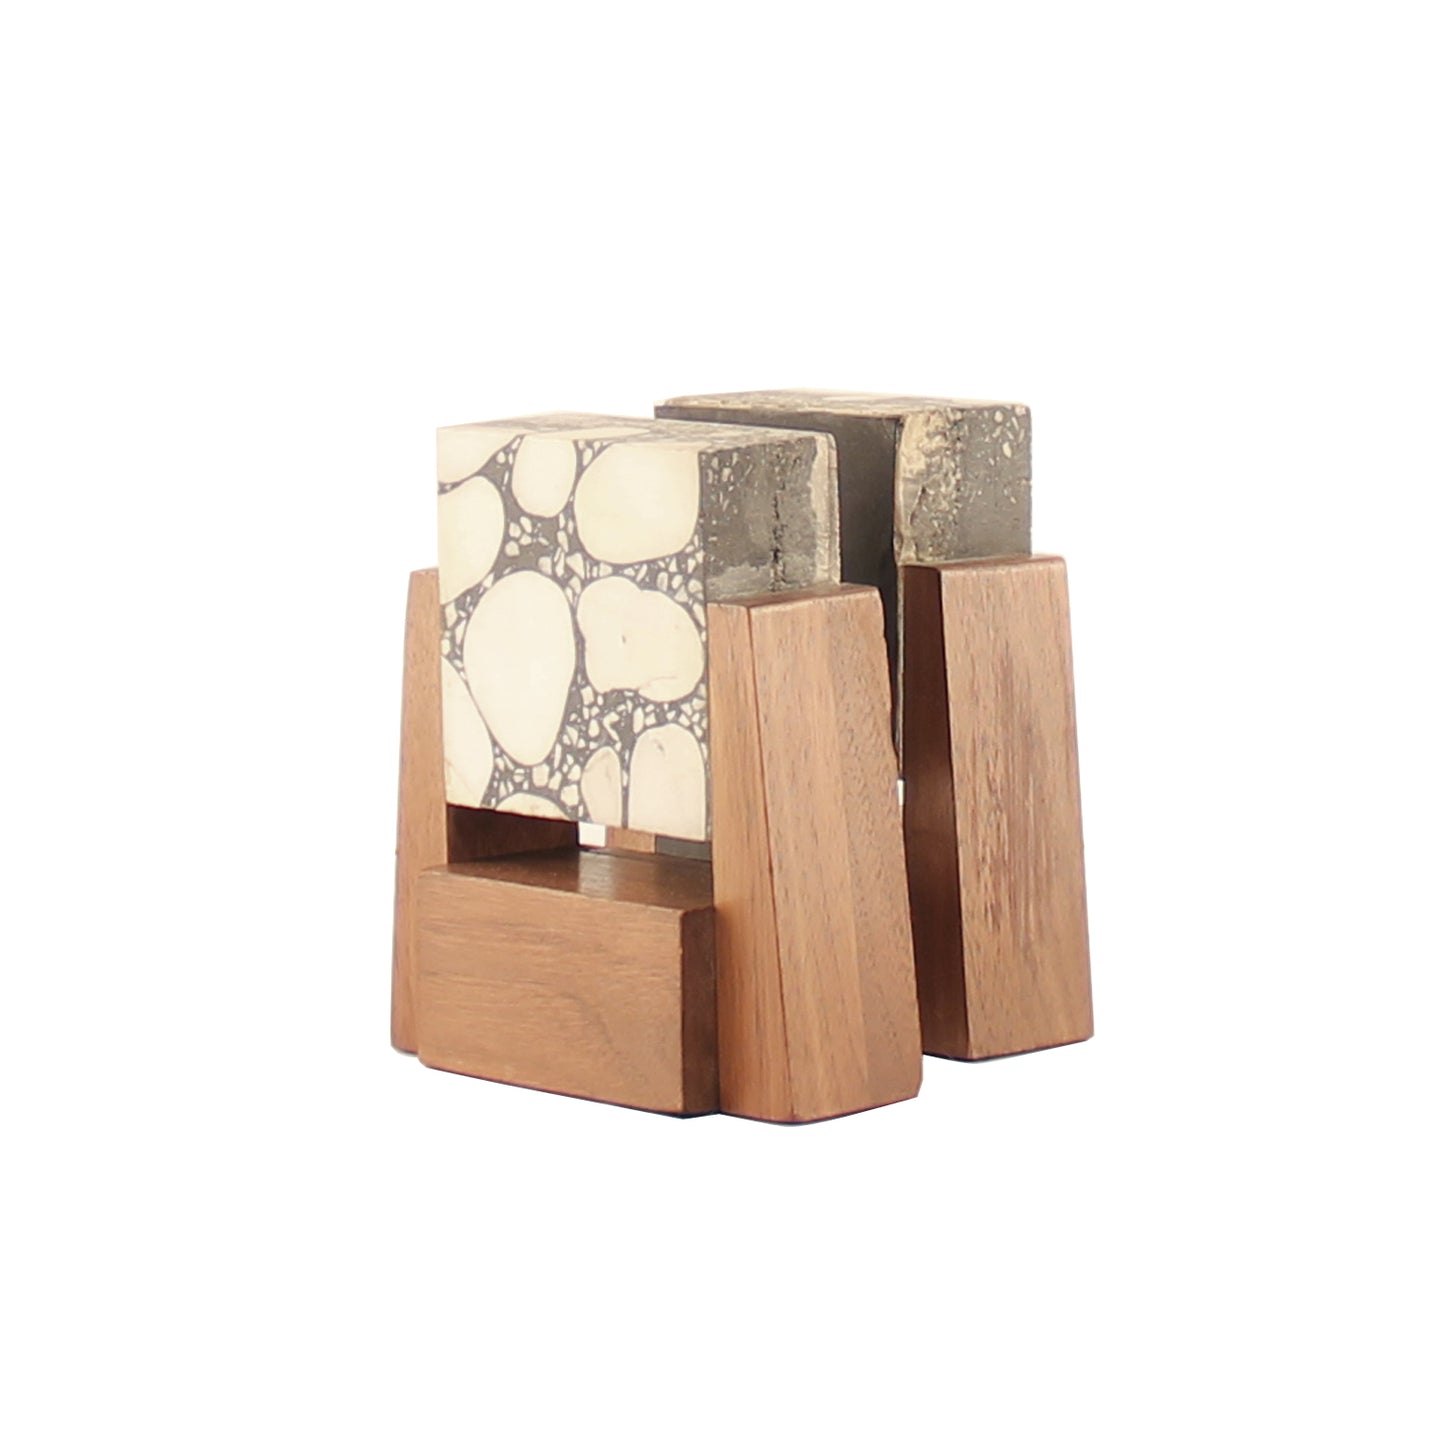 Magnificent Art Deco Stone Marble and Walnut Bookends